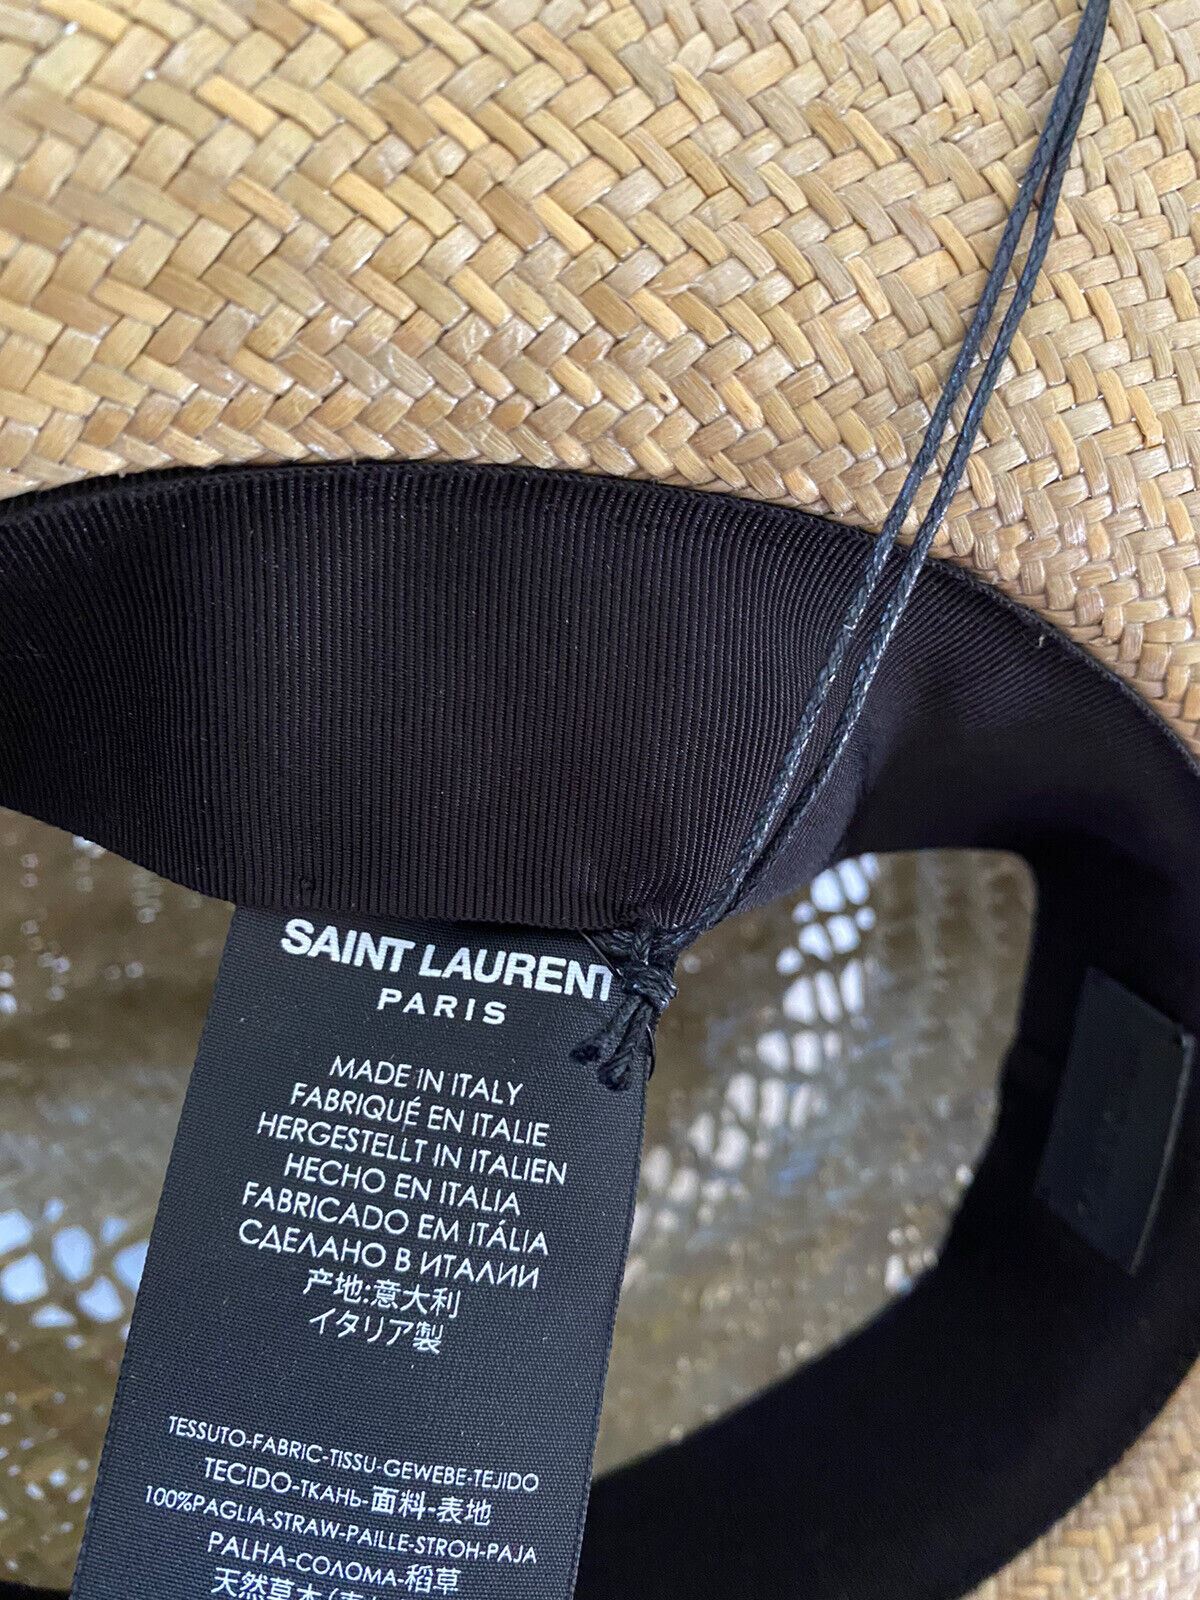 NWT $895 Saint Laurent Straw Cowboy Hat With Leather and Feathers Brown L